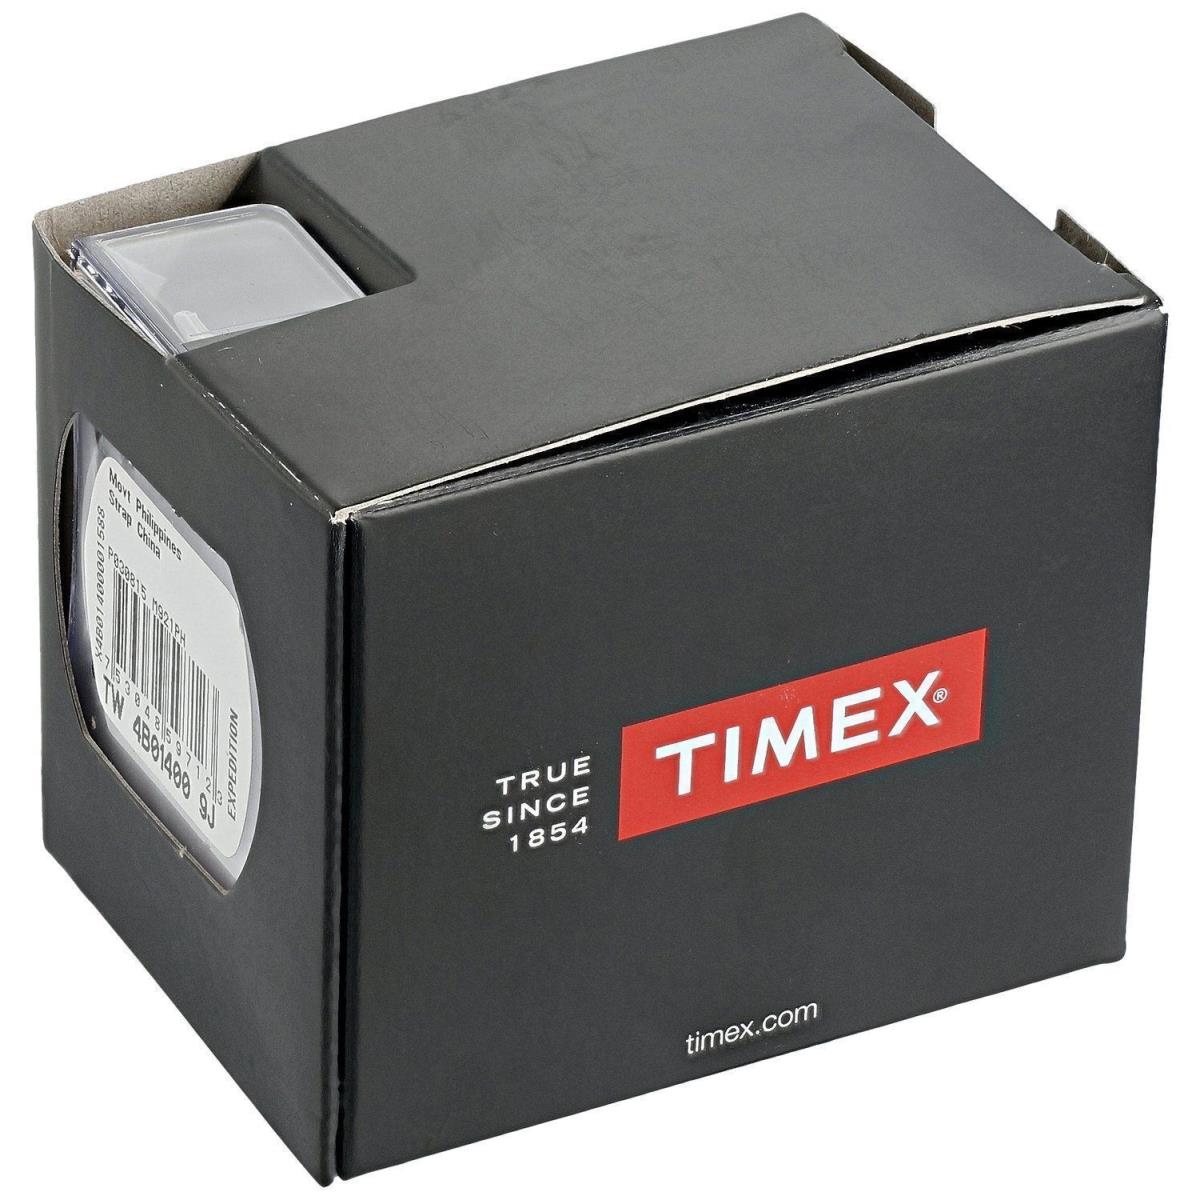 Timex TW4B28700 Mid-size Expedition Chronograph Resin Watch Alarm Indiglo